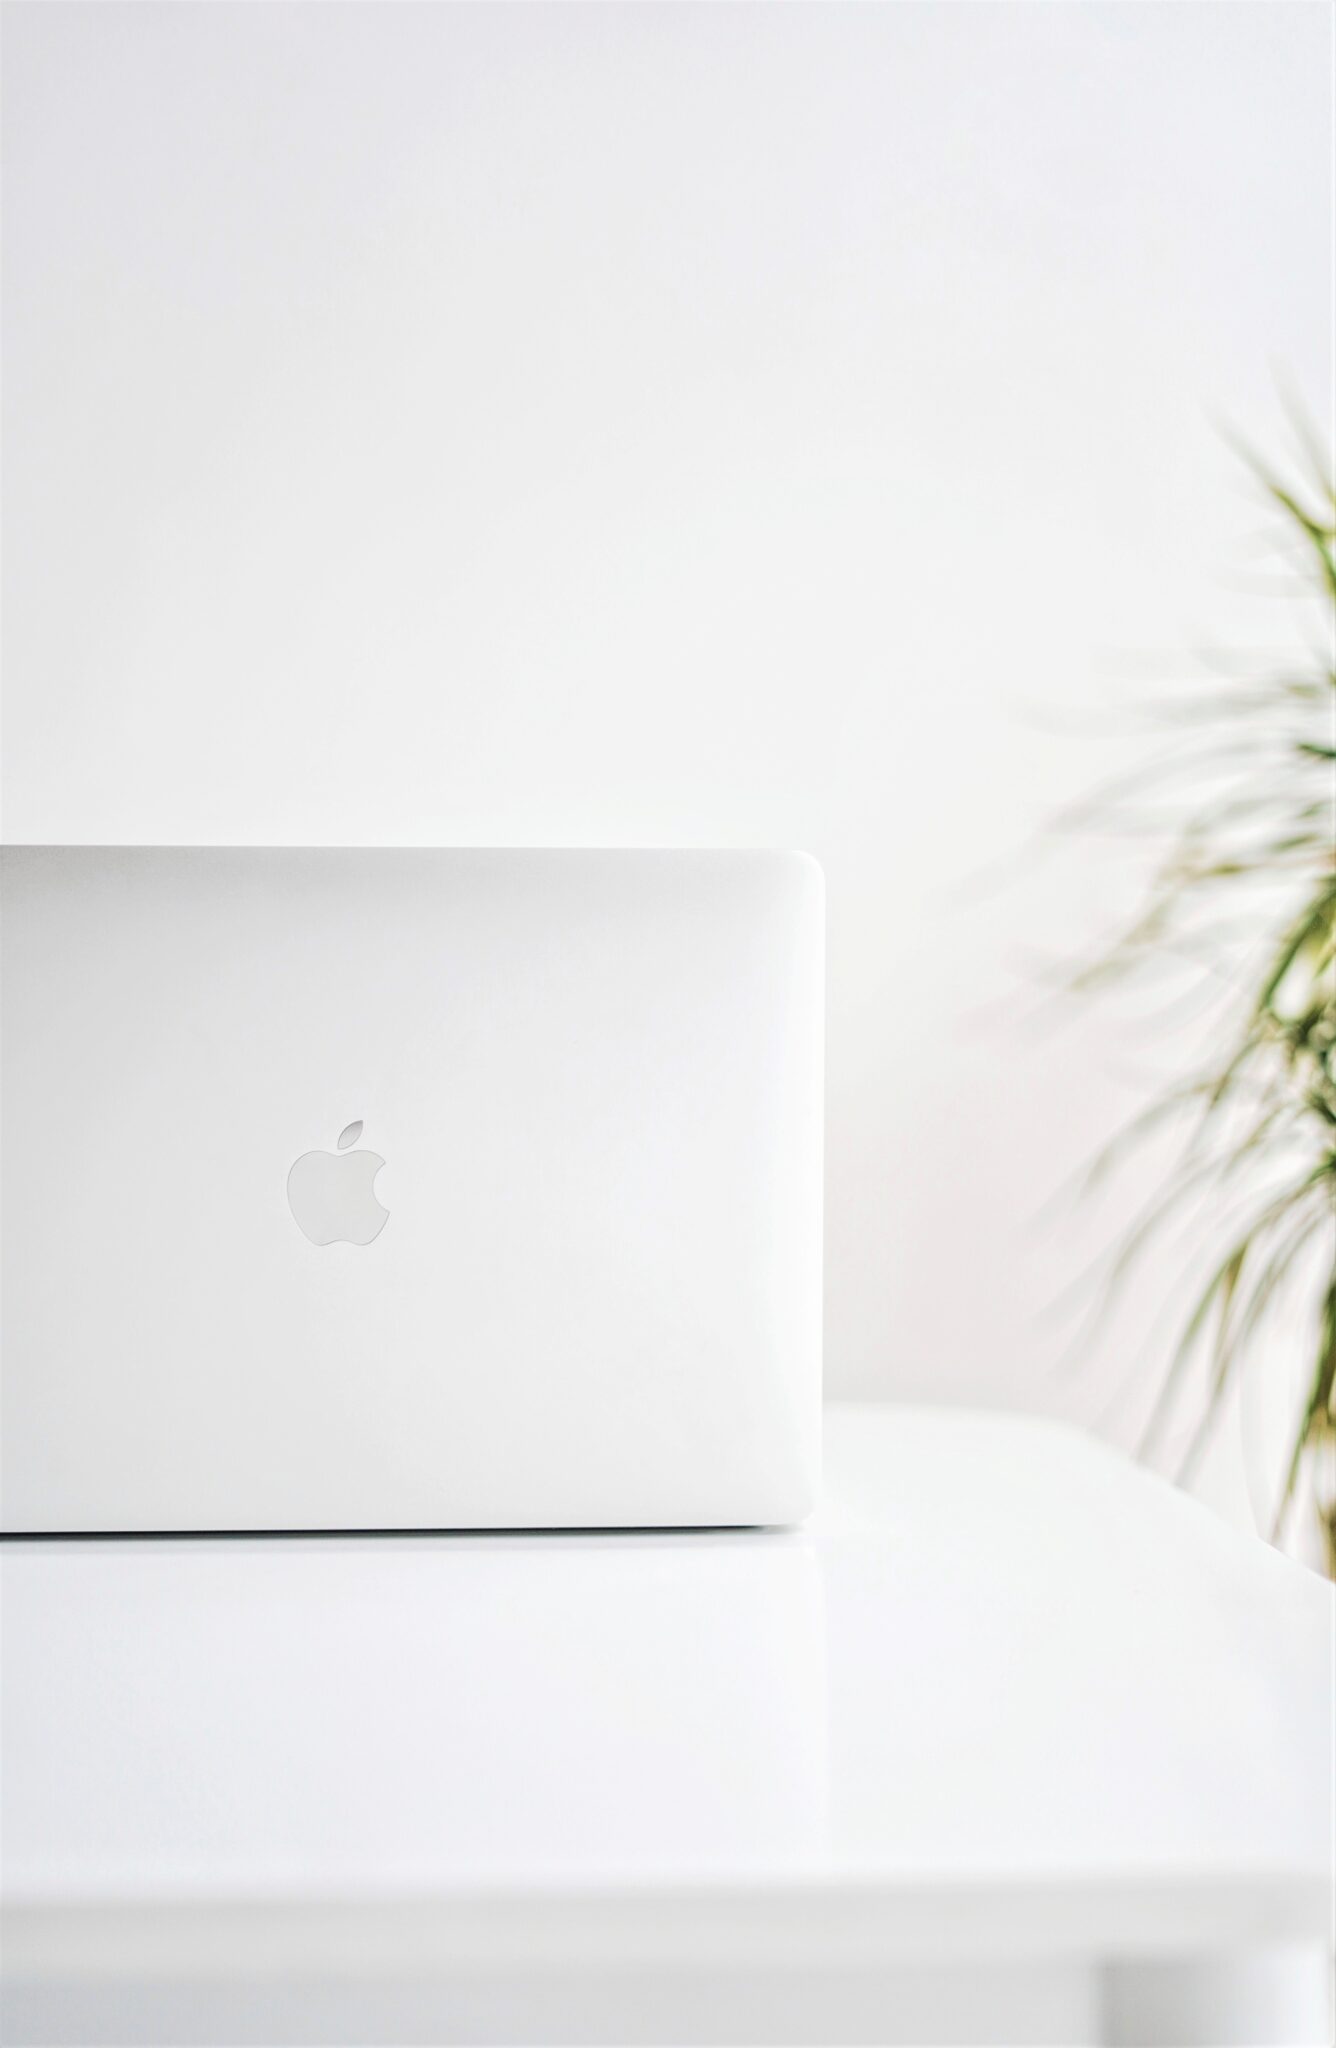 A silver Macbook sits on a white table and green plant is in view. This article covers tips and tricks for Macbook users.